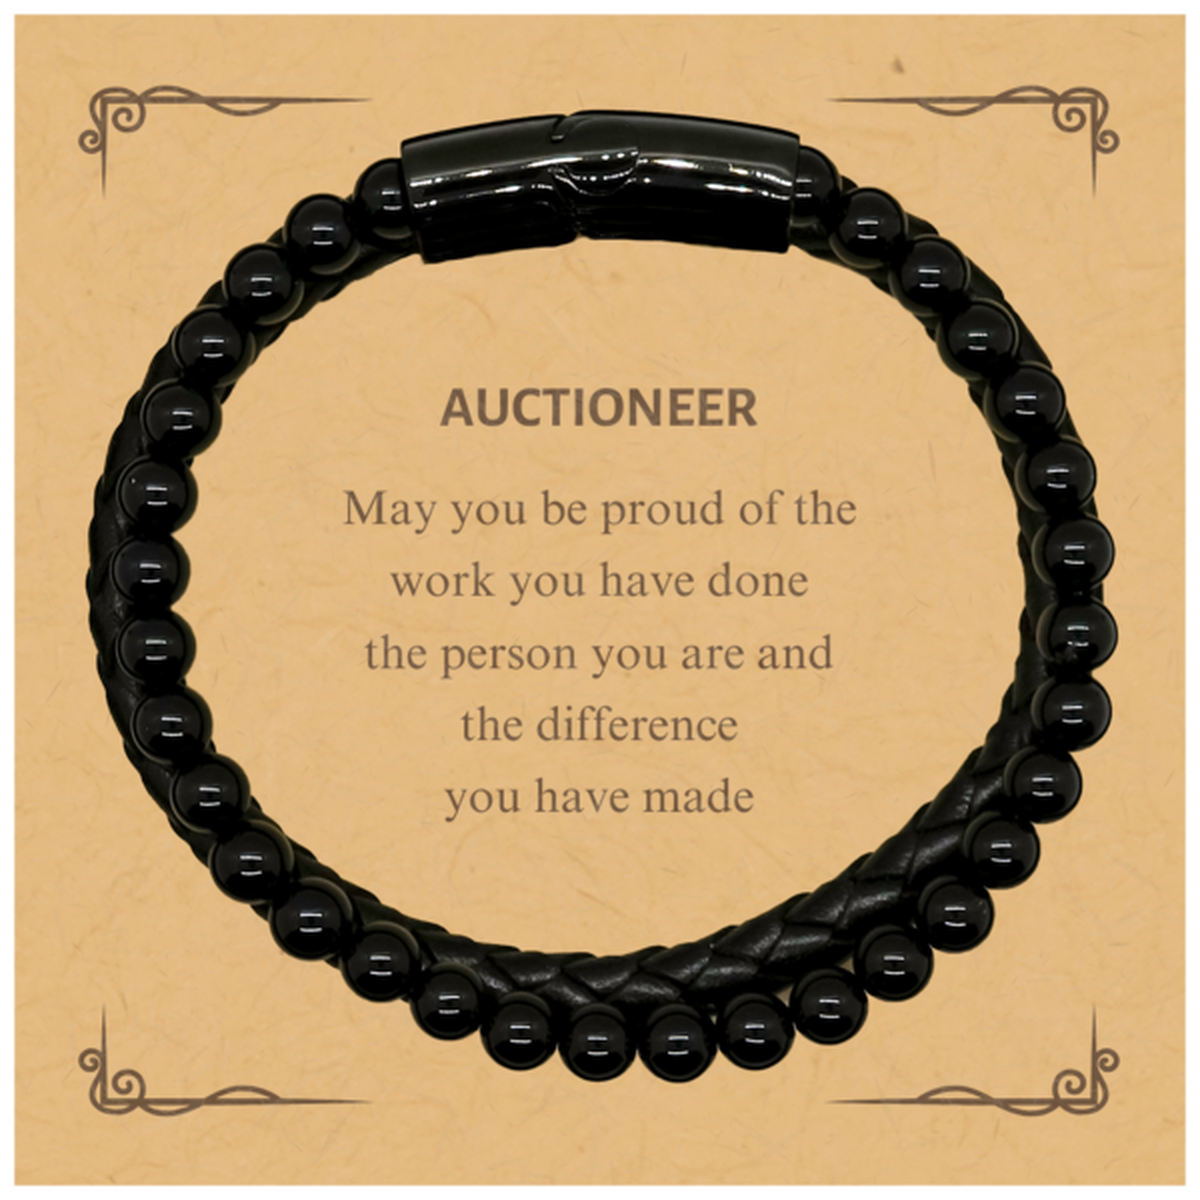 Auctioneer May you be proud of the work you have done, Retirement Auctioneer Stone Leather Bracelets for Colleague Appreciation Gifts Amazing for Auctioneer